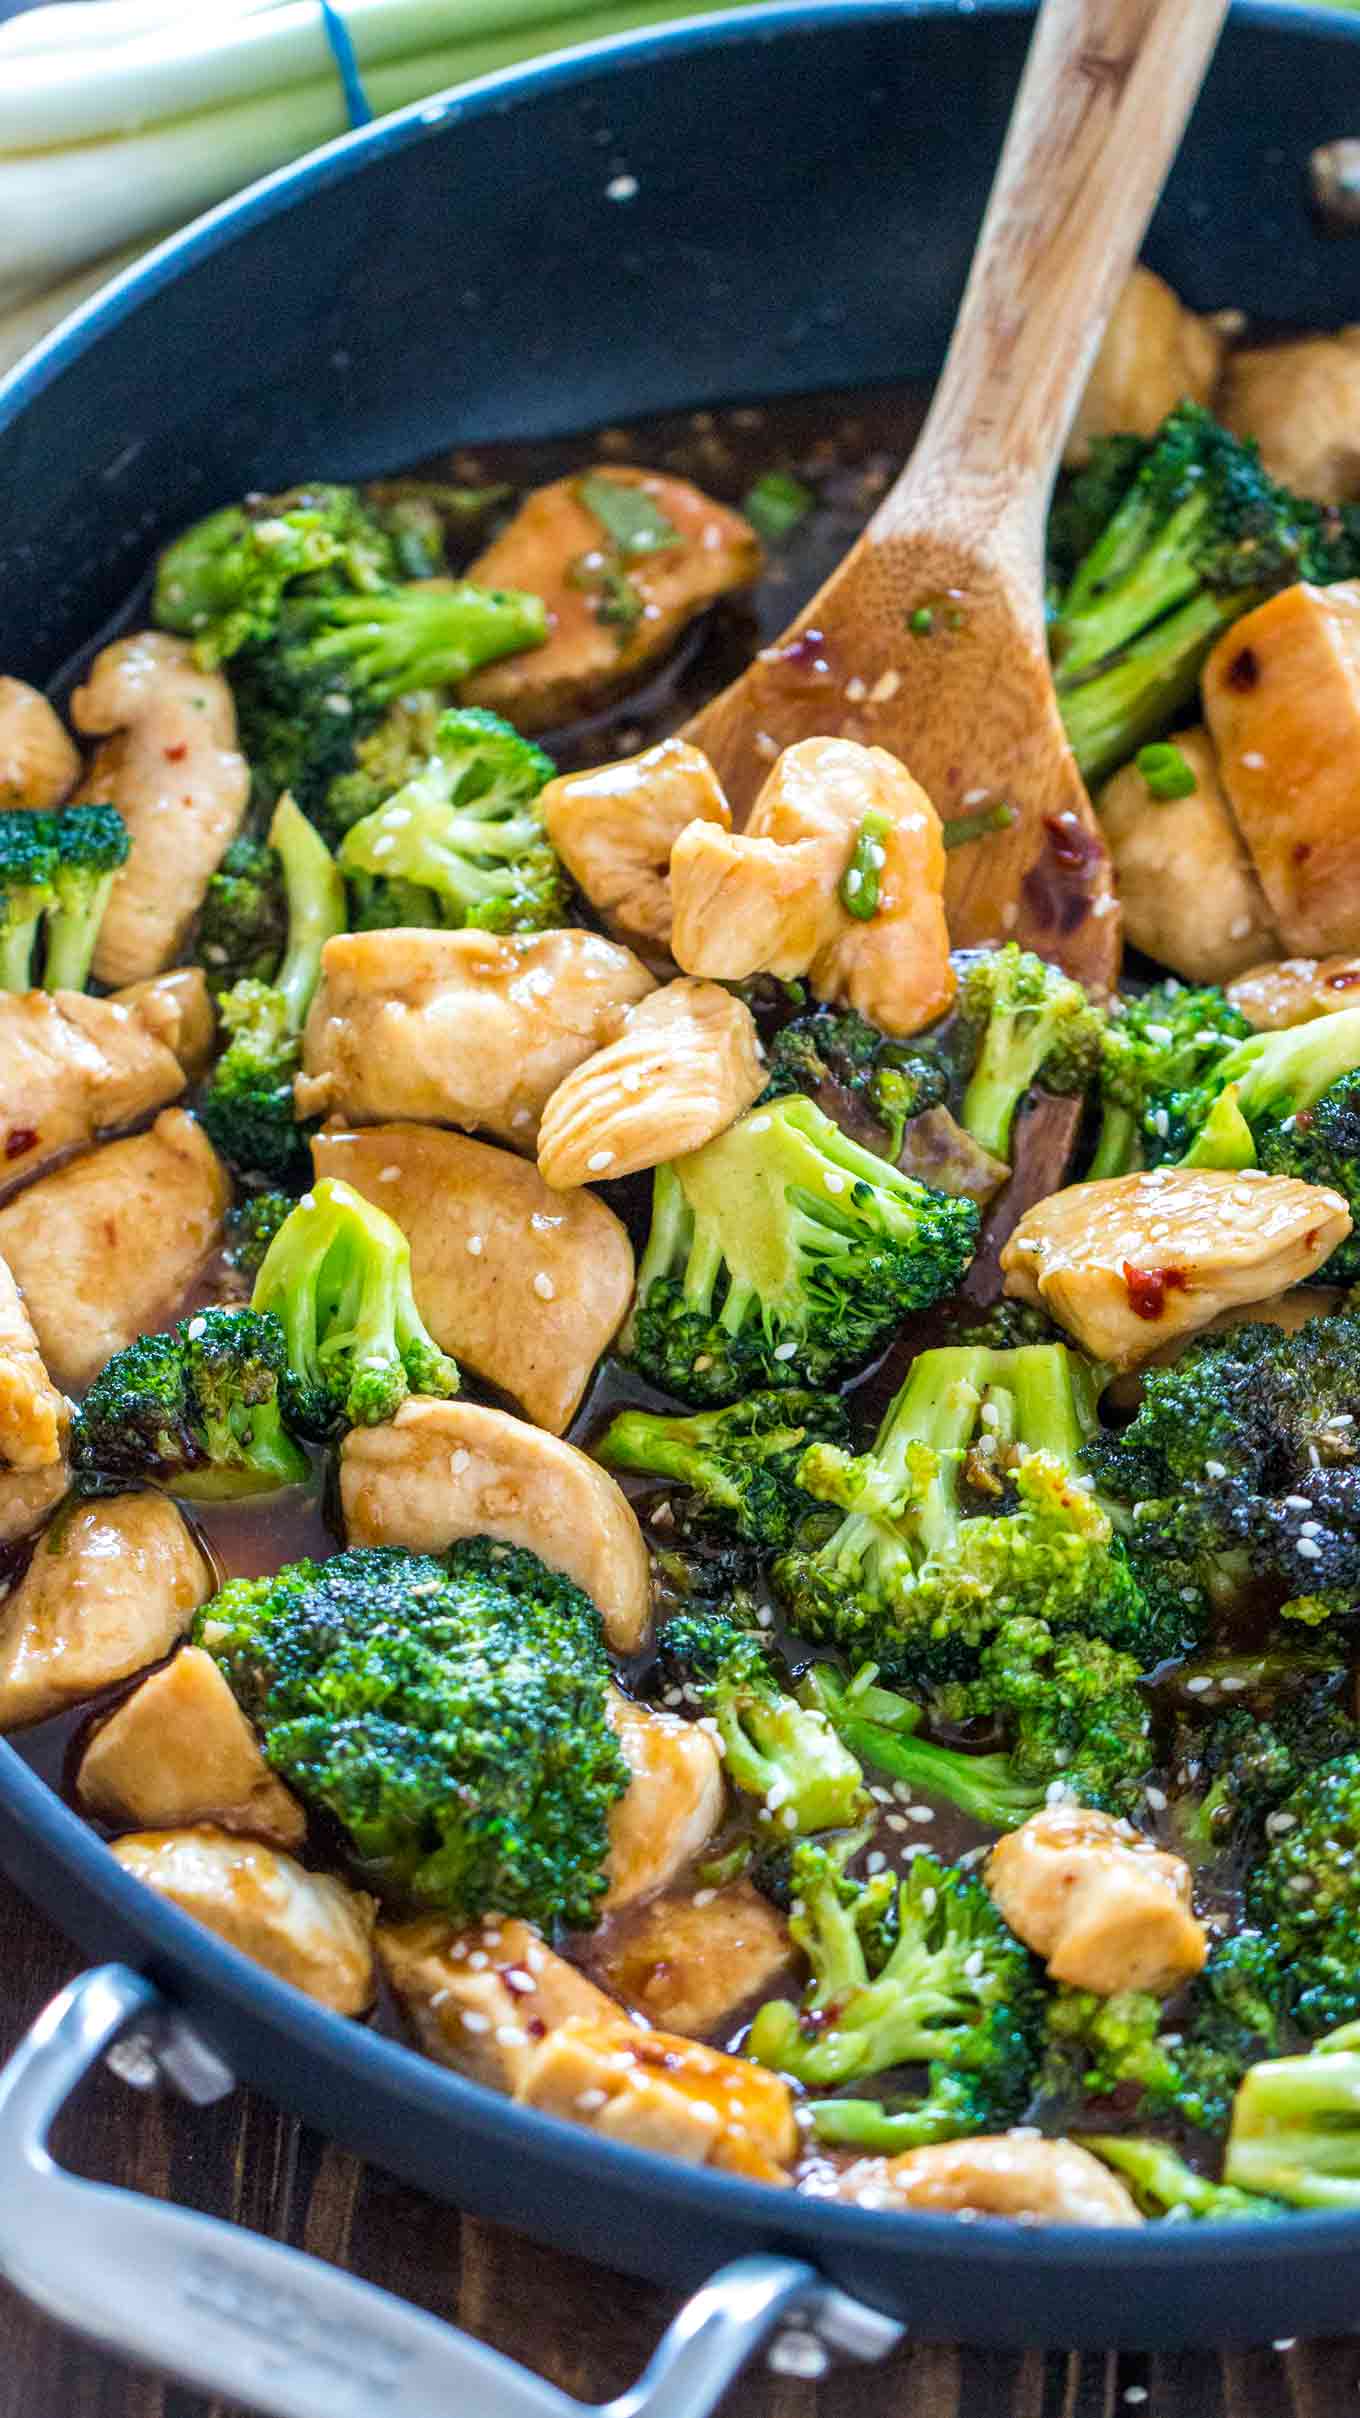 Chicken and Broccoli Stir Fry [Video] - Sweet and Savory Meals